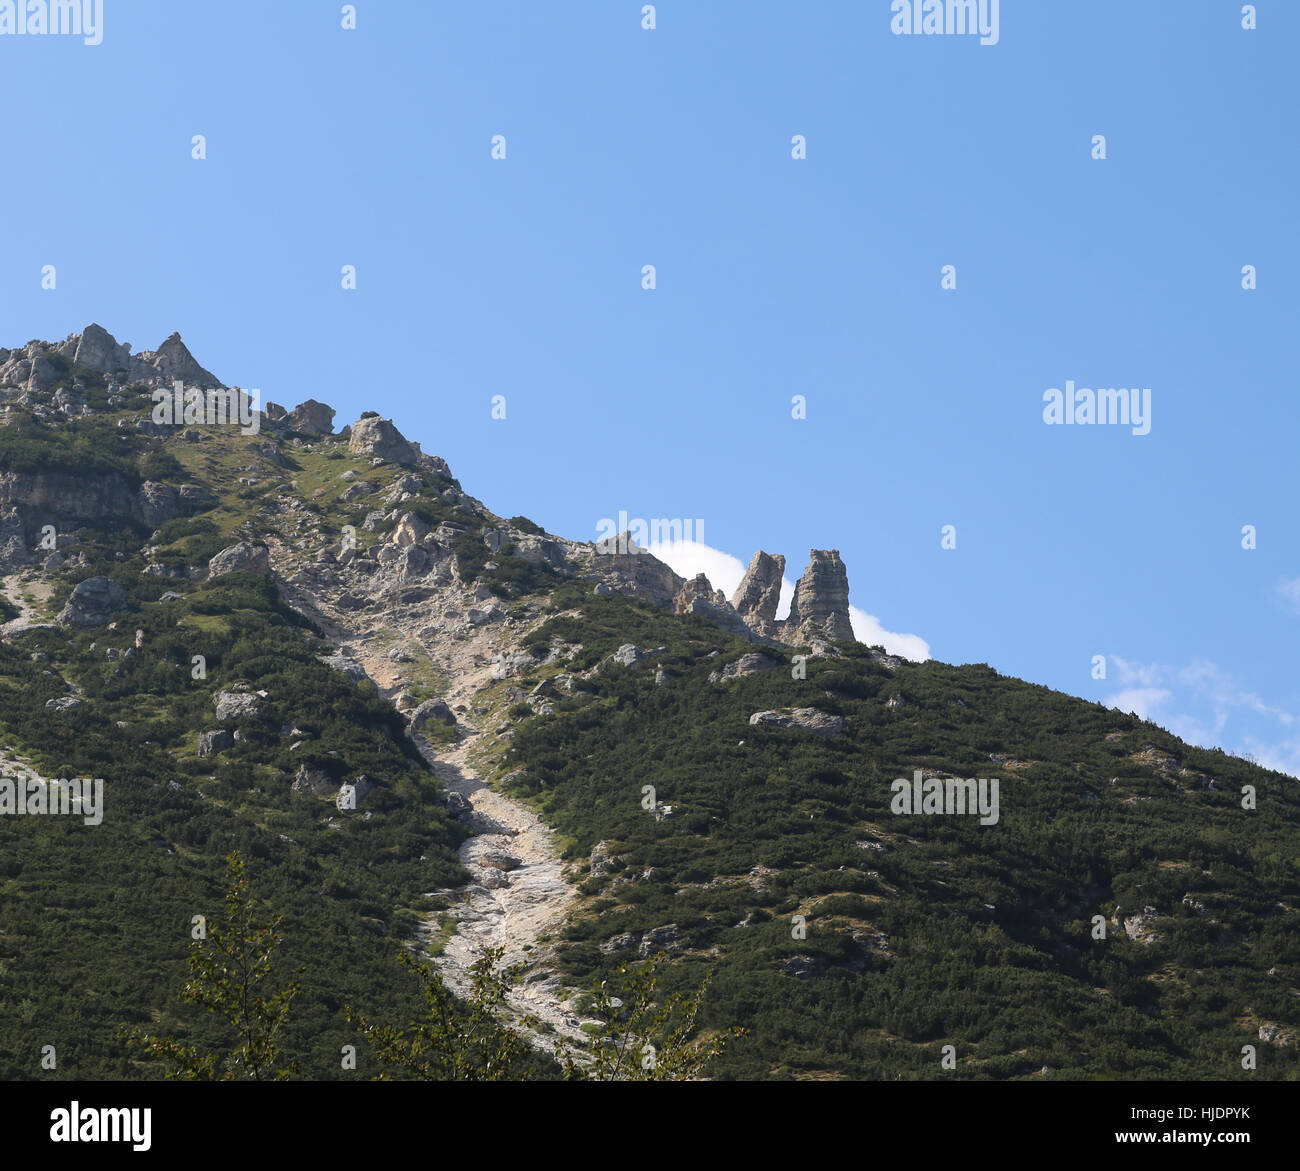 italian foothills with two spikes rock called in Venetian dialect OMO e DONA that means the man and the woman Stock Photo